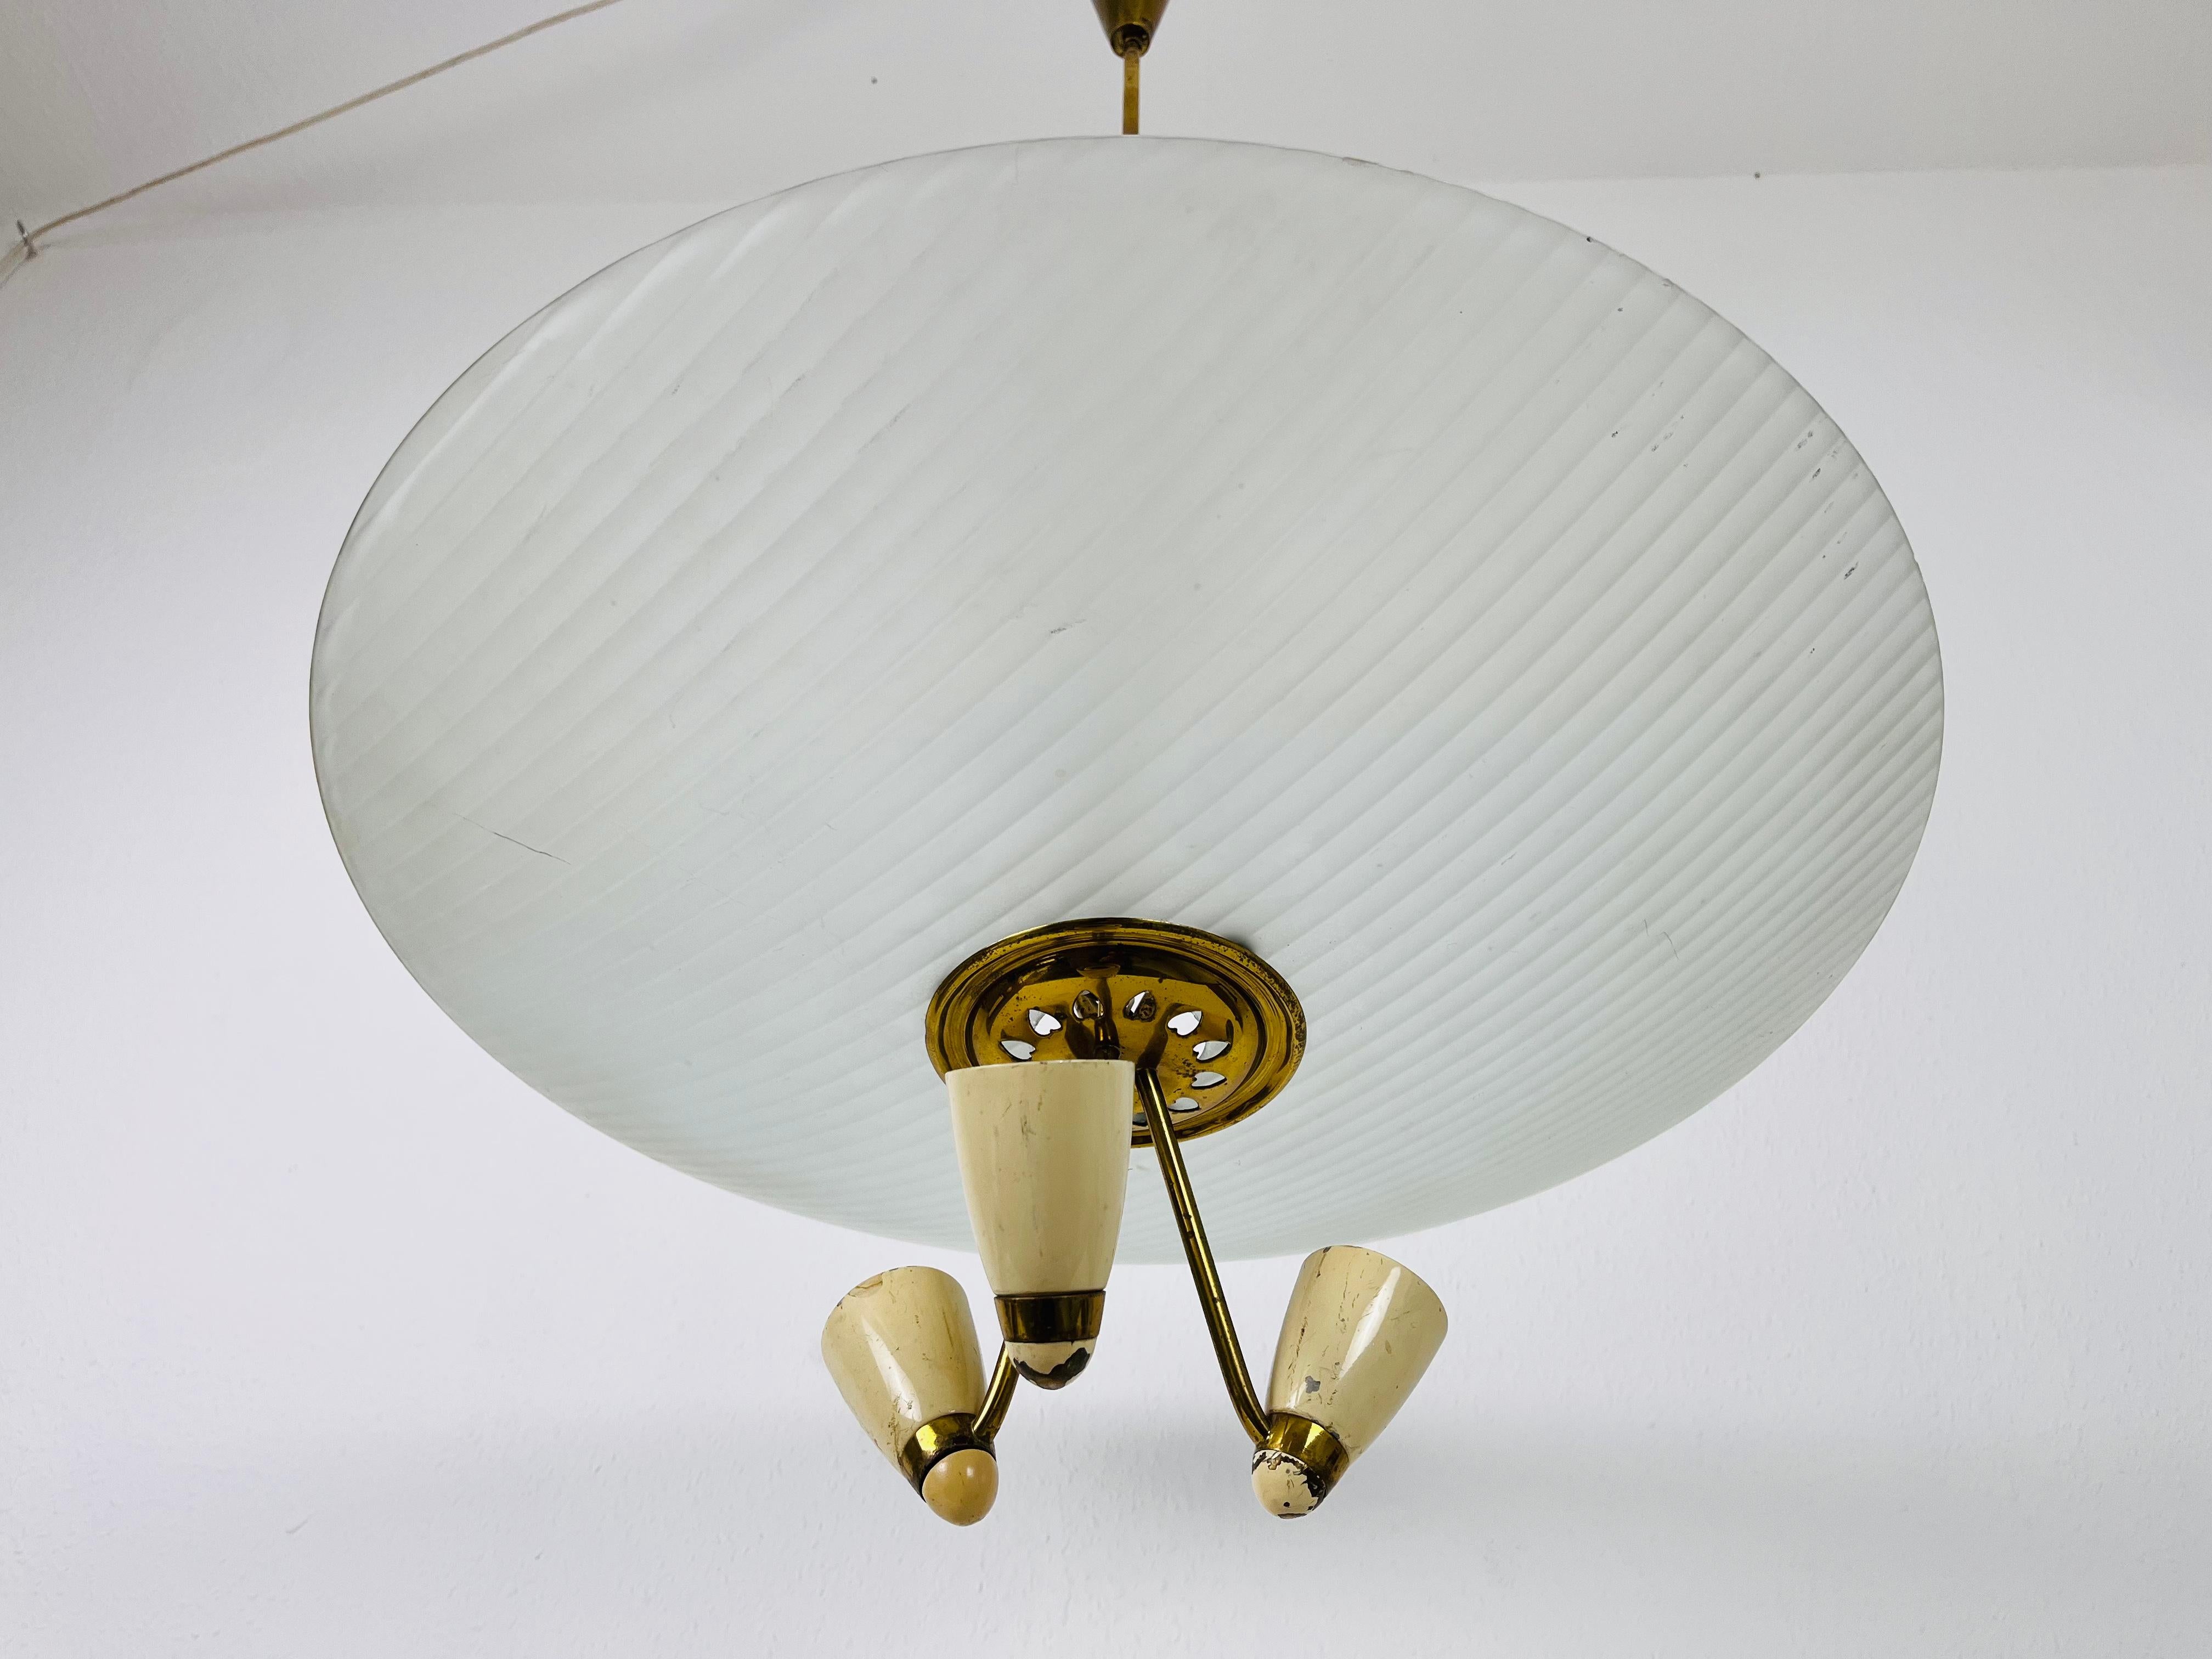 Italian Midcentury Brass and Glass Chandelier, 1950s For Sale 5